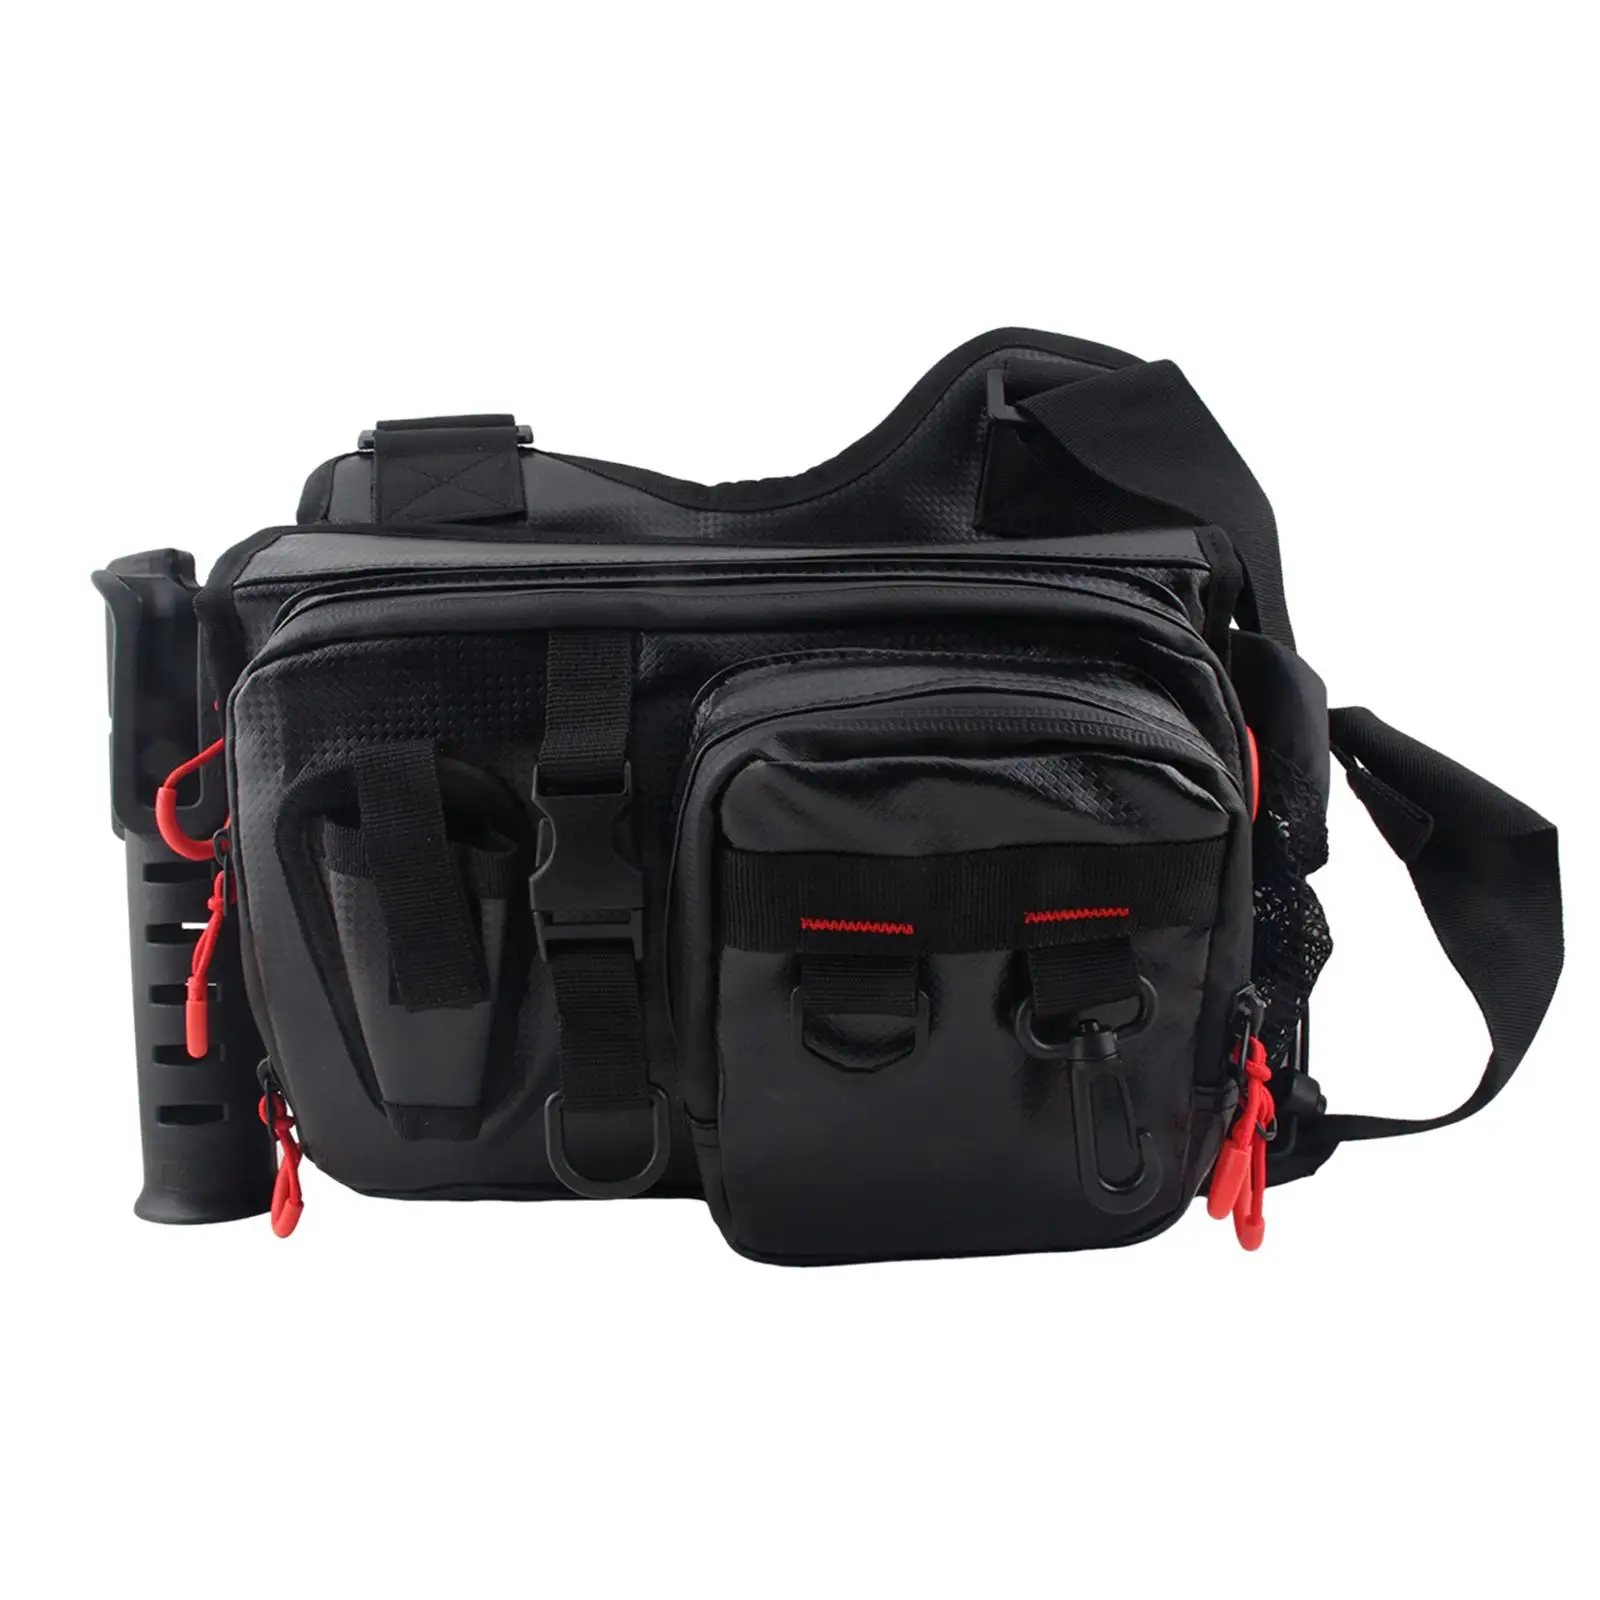 Lure Bag Resistant Waterproof Fashion Accs Fishing Bag Fanny Pack Lure Fishing Bag for Hiking Fishing Camping Outdoor Adult